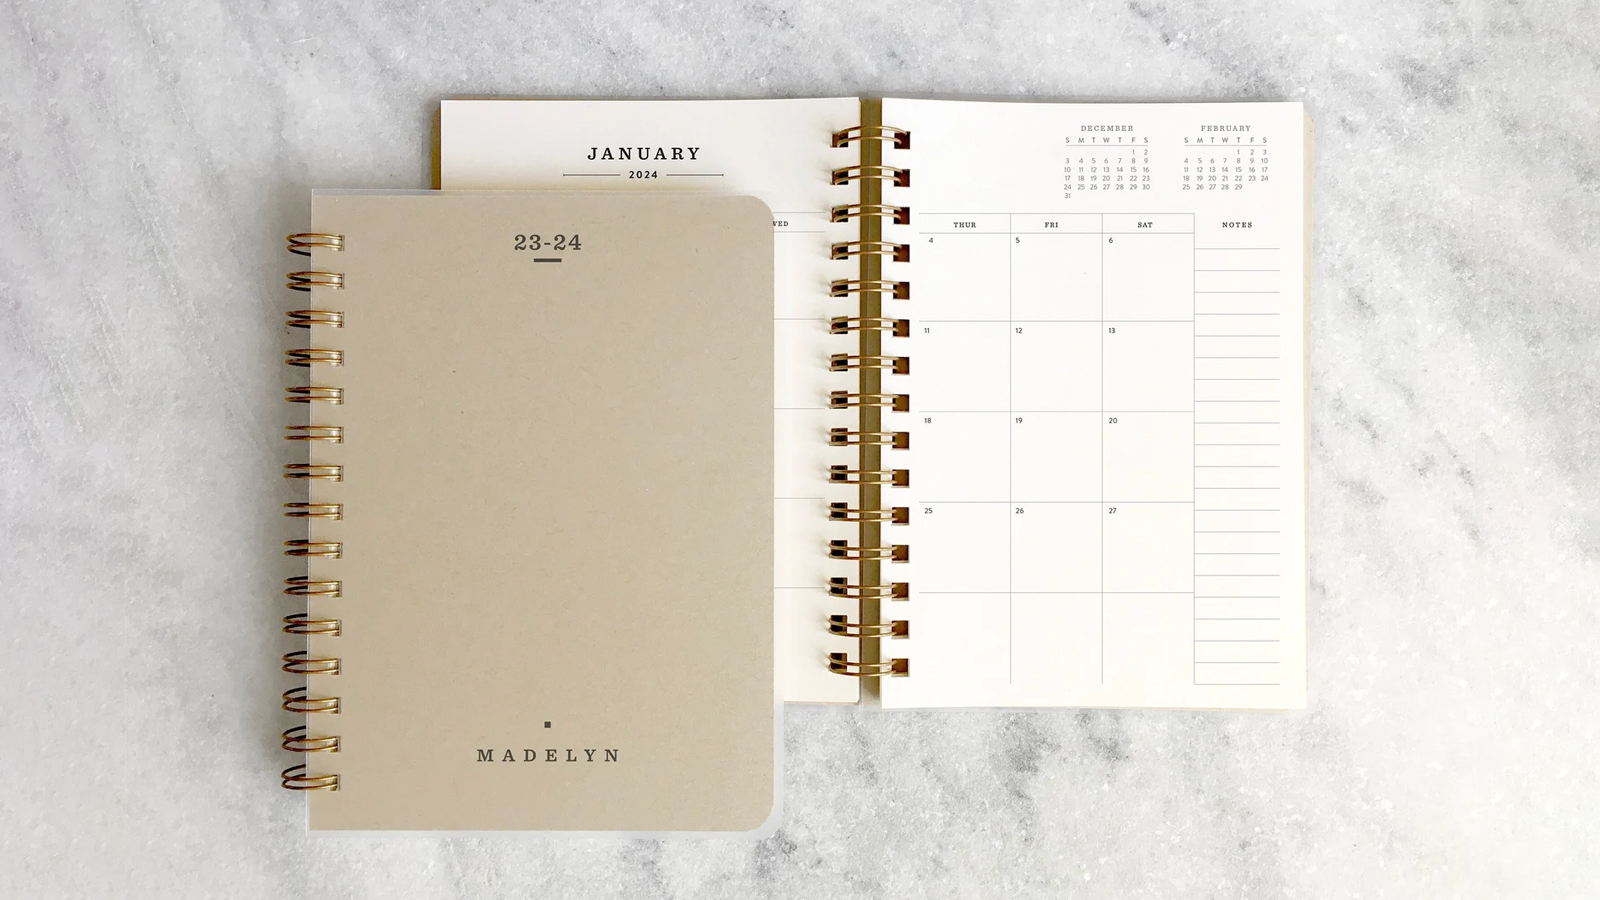 personalized planner